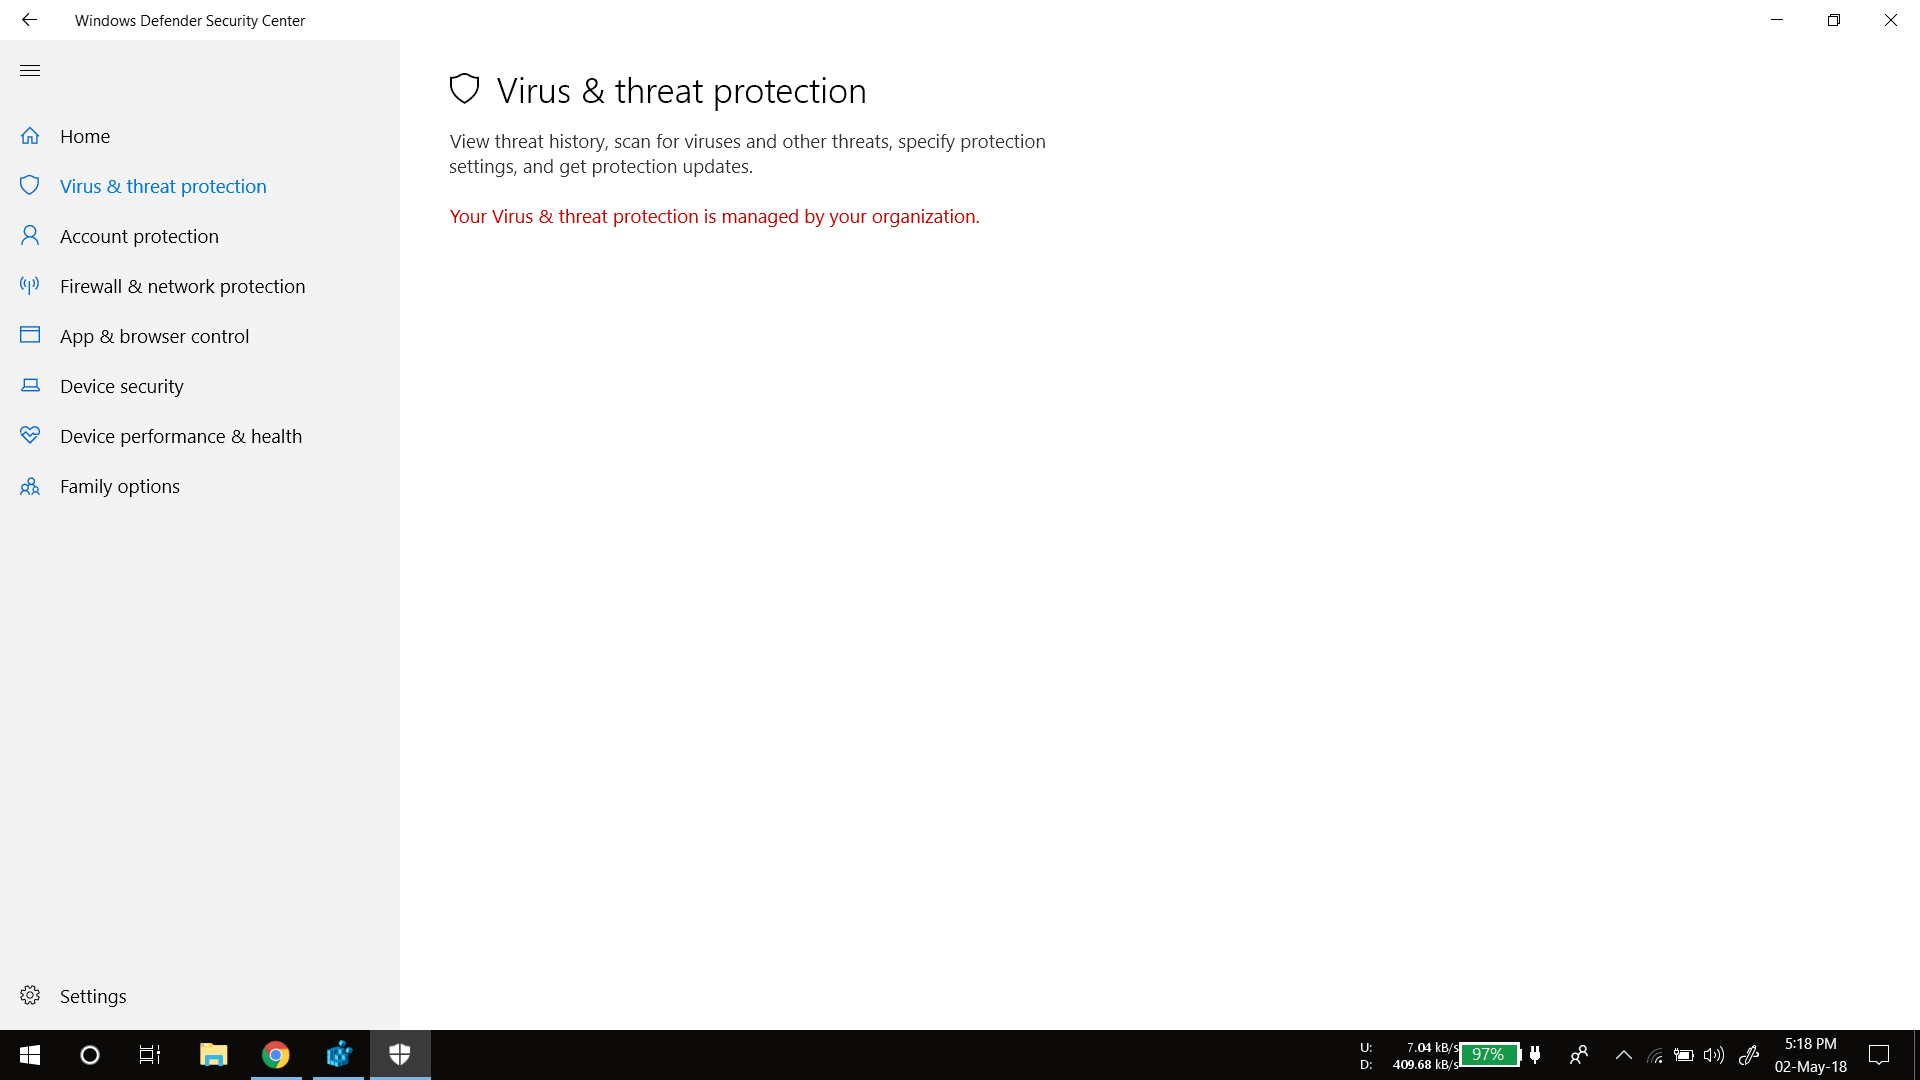 Virus protection and threats are managed by the organization 6408d6ee-1c20-4c97-bf4e-3622cf2cee50?upload=true.png